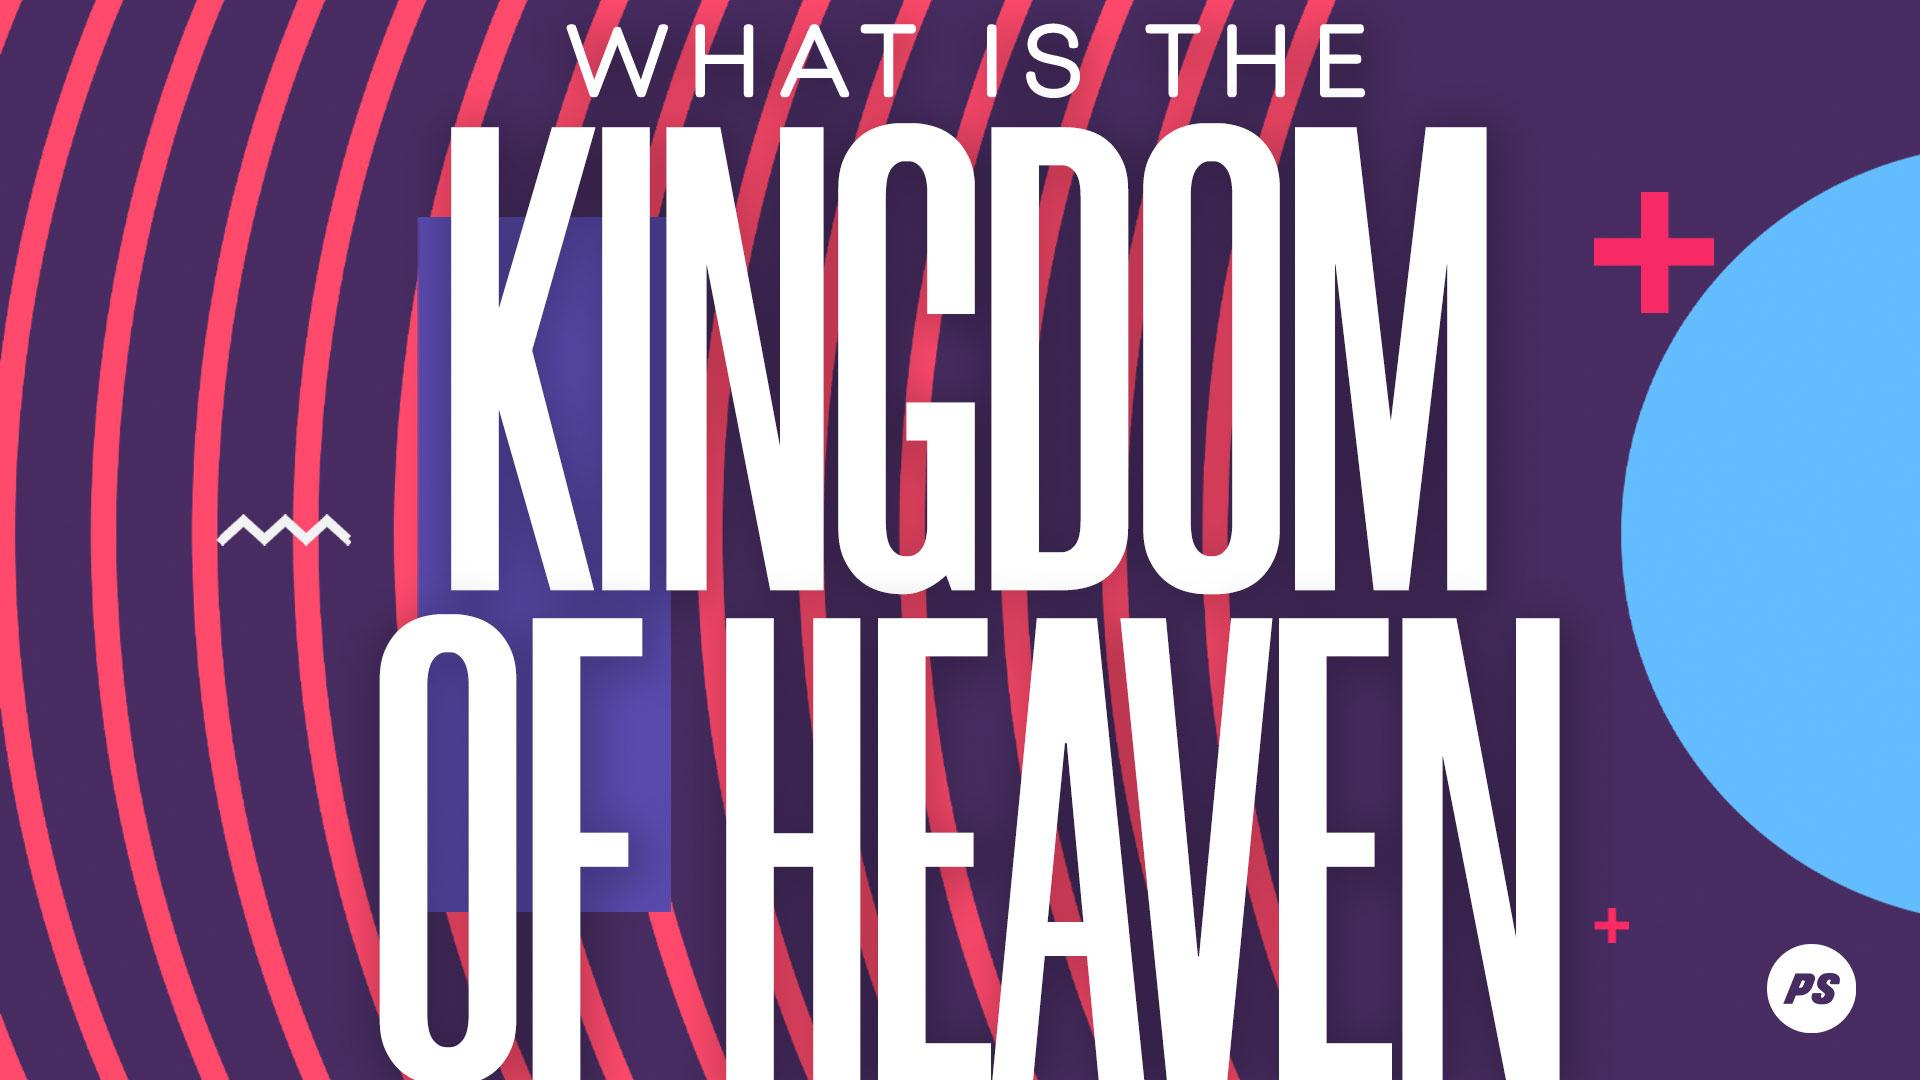 Featured image for “What is the Kingdom of Heaven?”